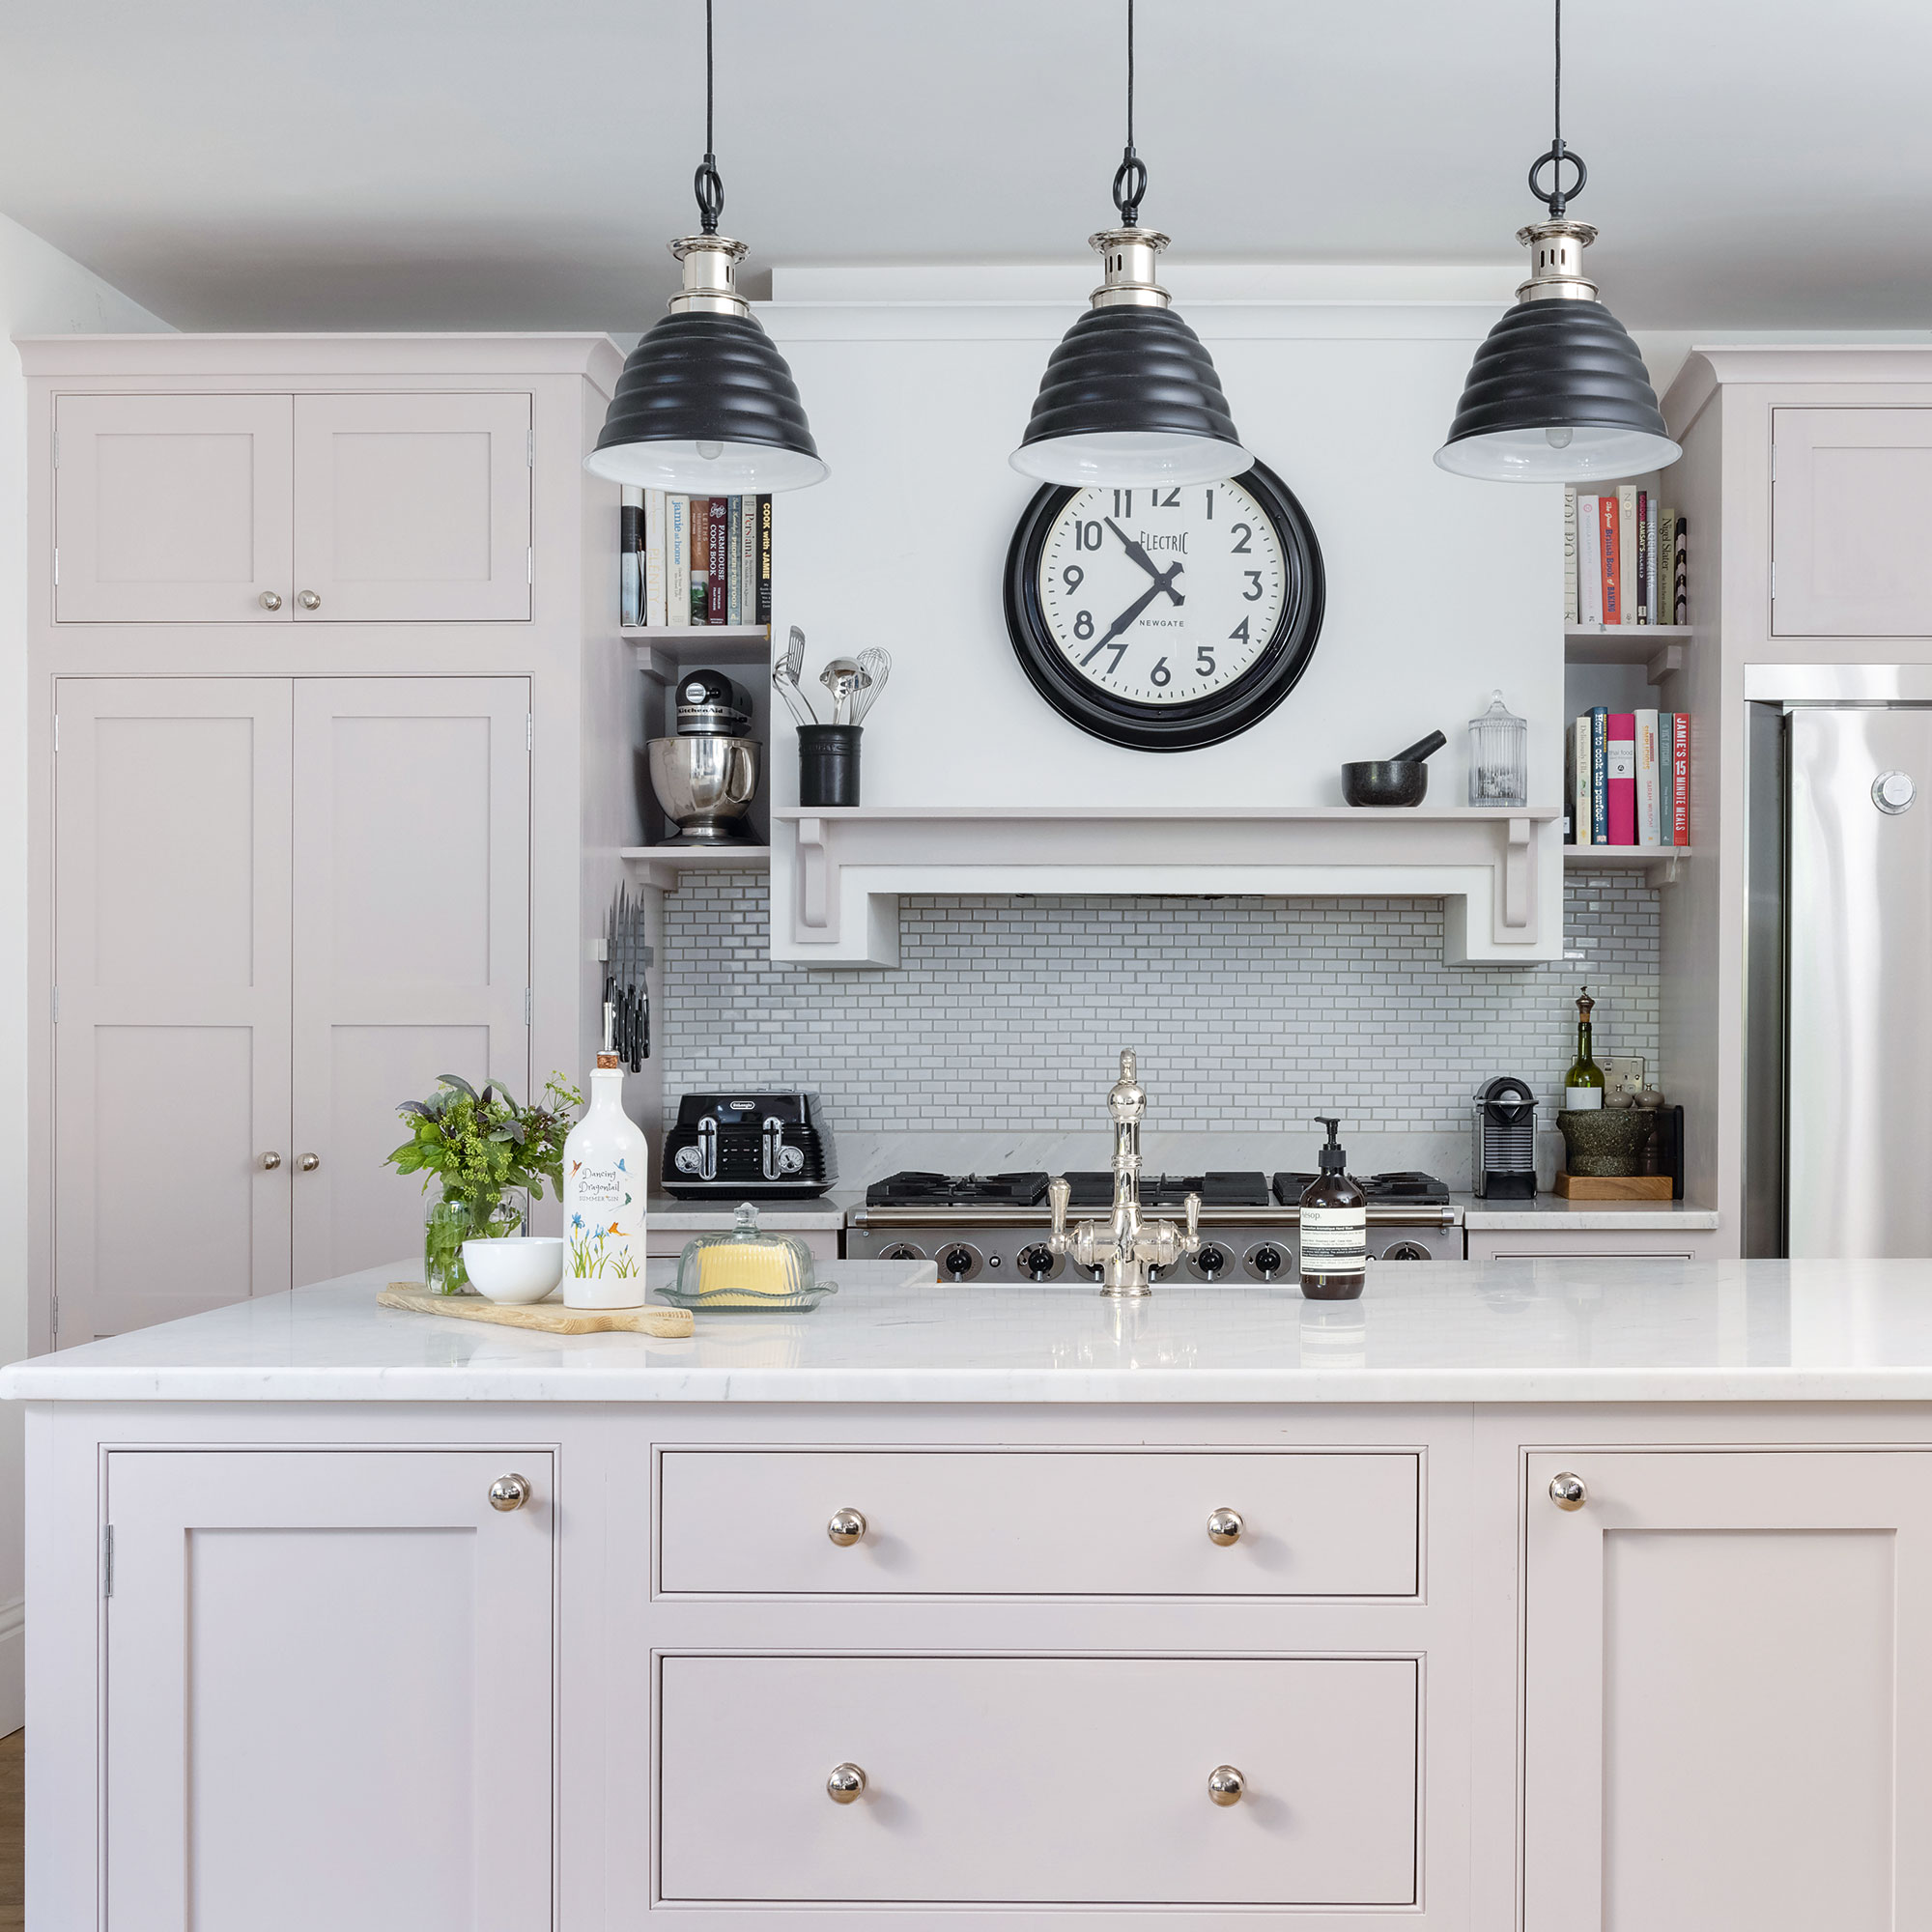 Georgian kitchen with pale pink cabinets and marble work top